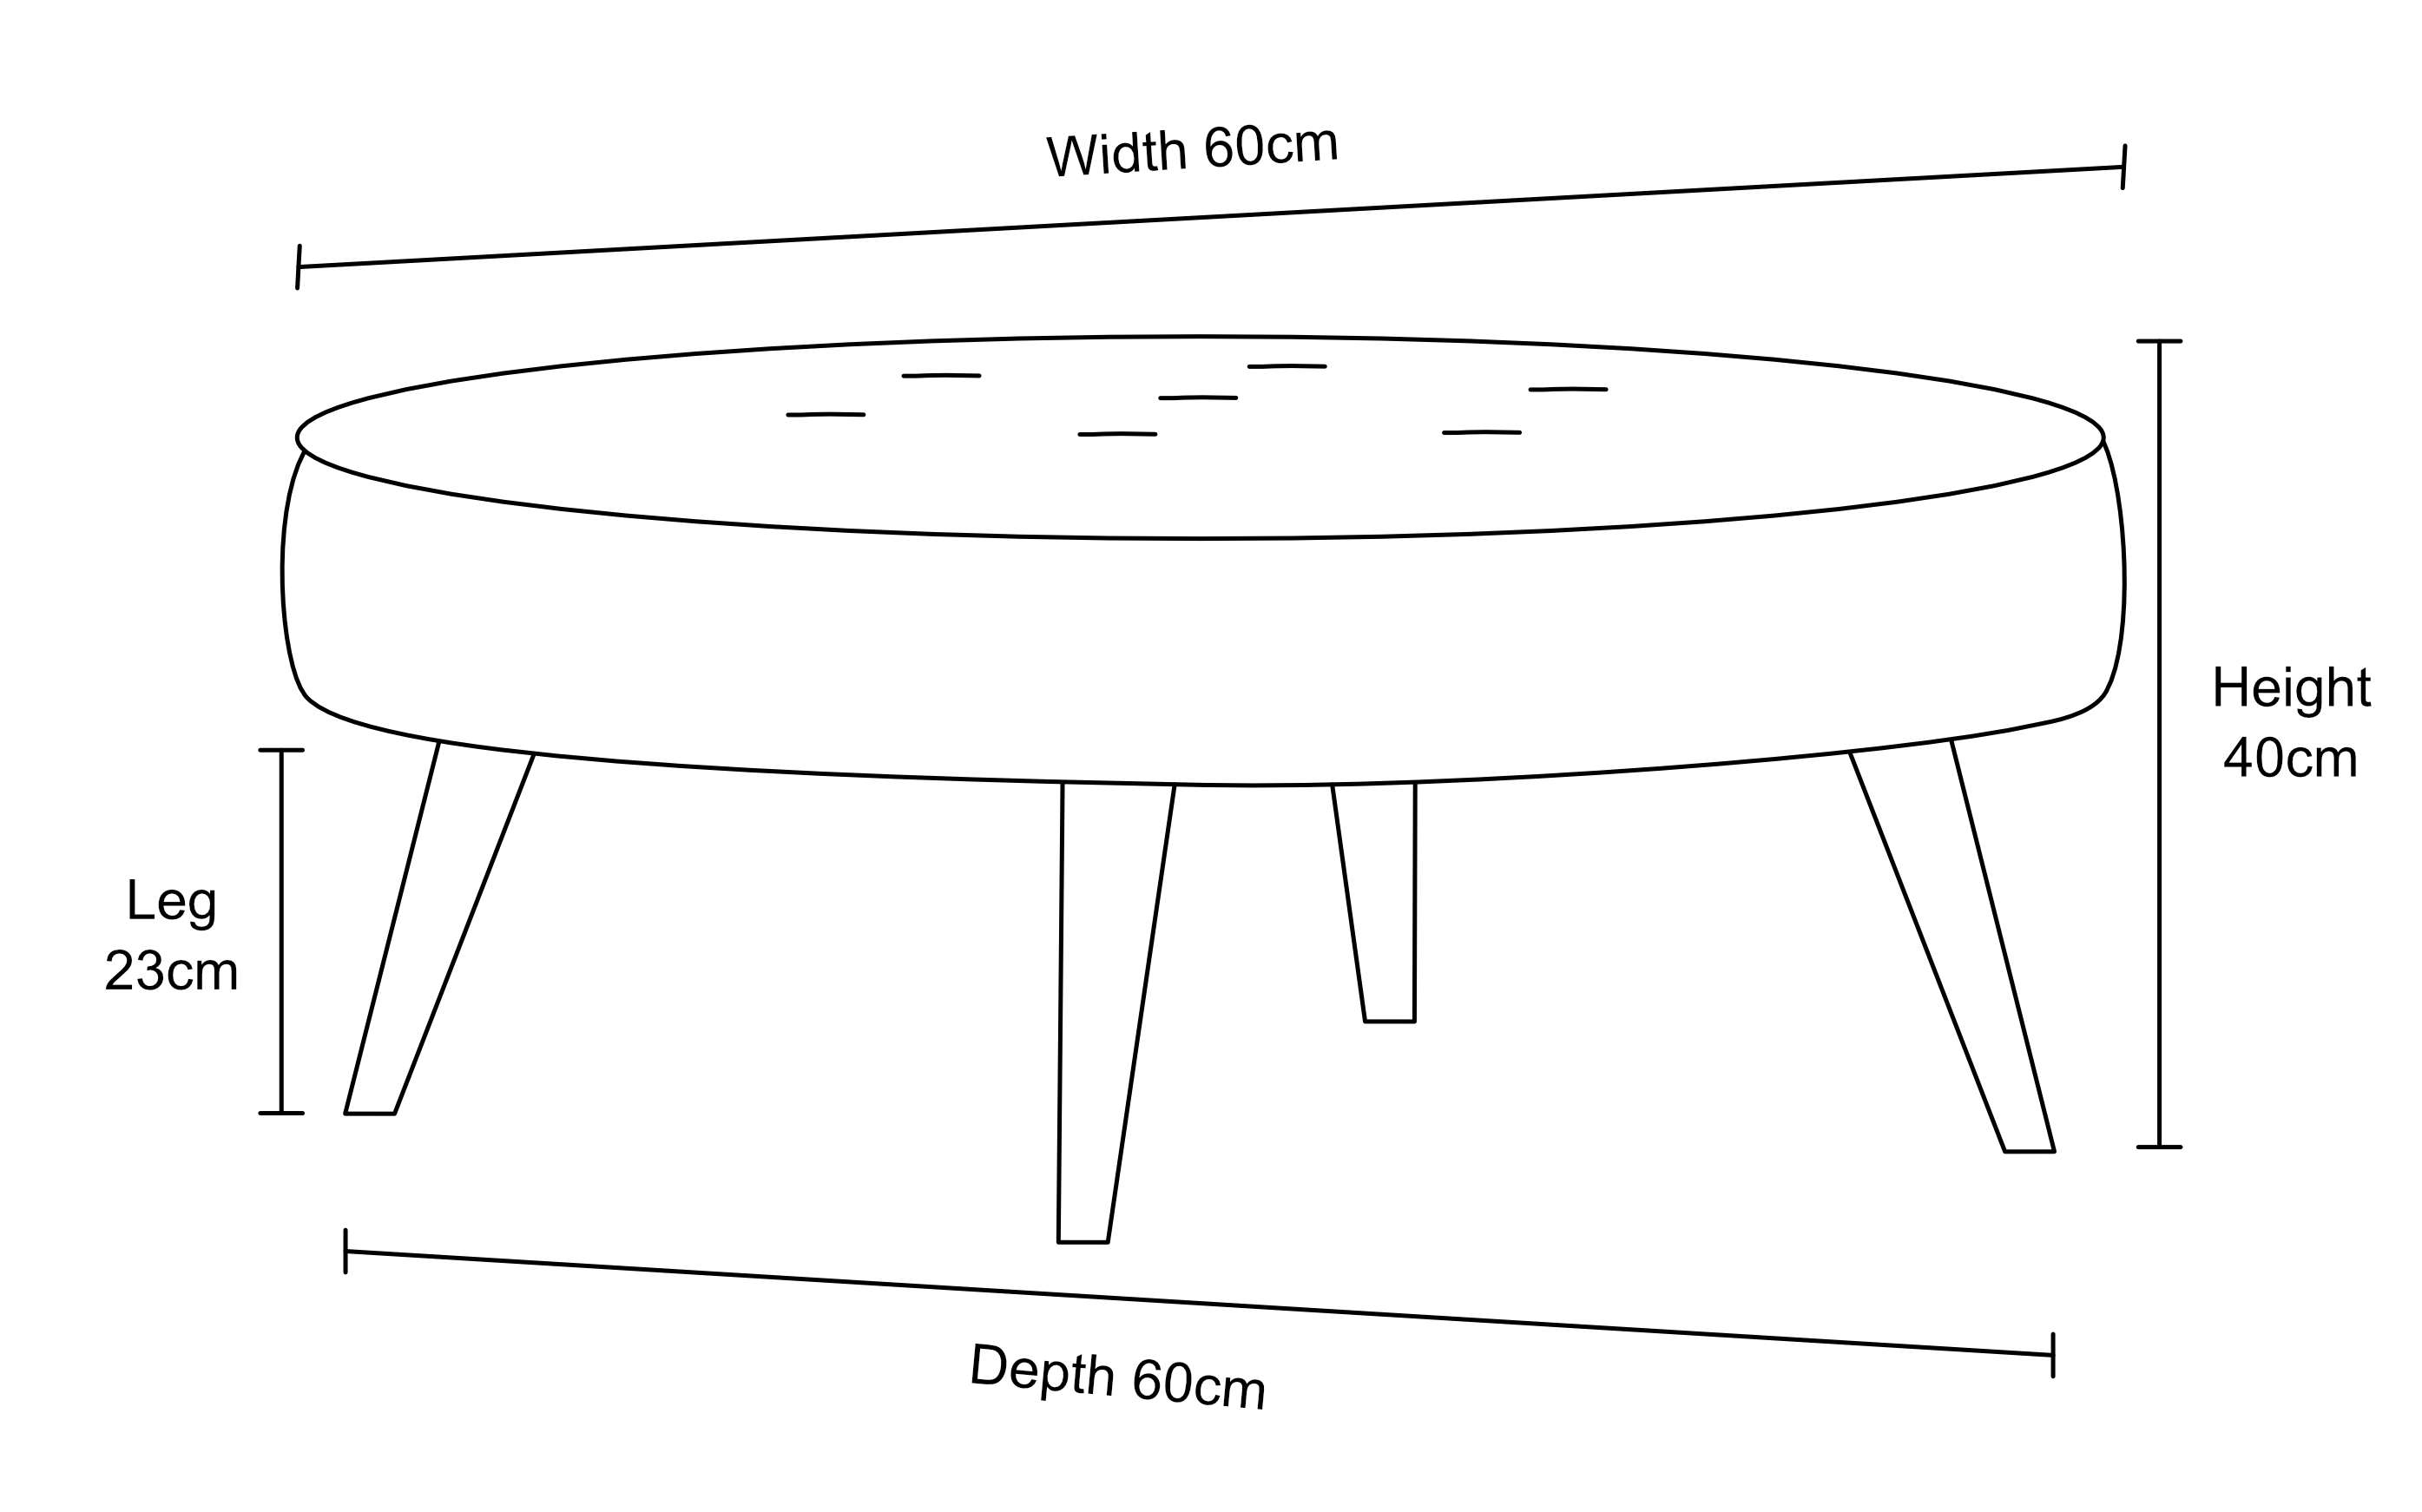 https://www.footstools.co.uk/wp-content/uploads/round-footstool-24x24-dimensions-2.jpg